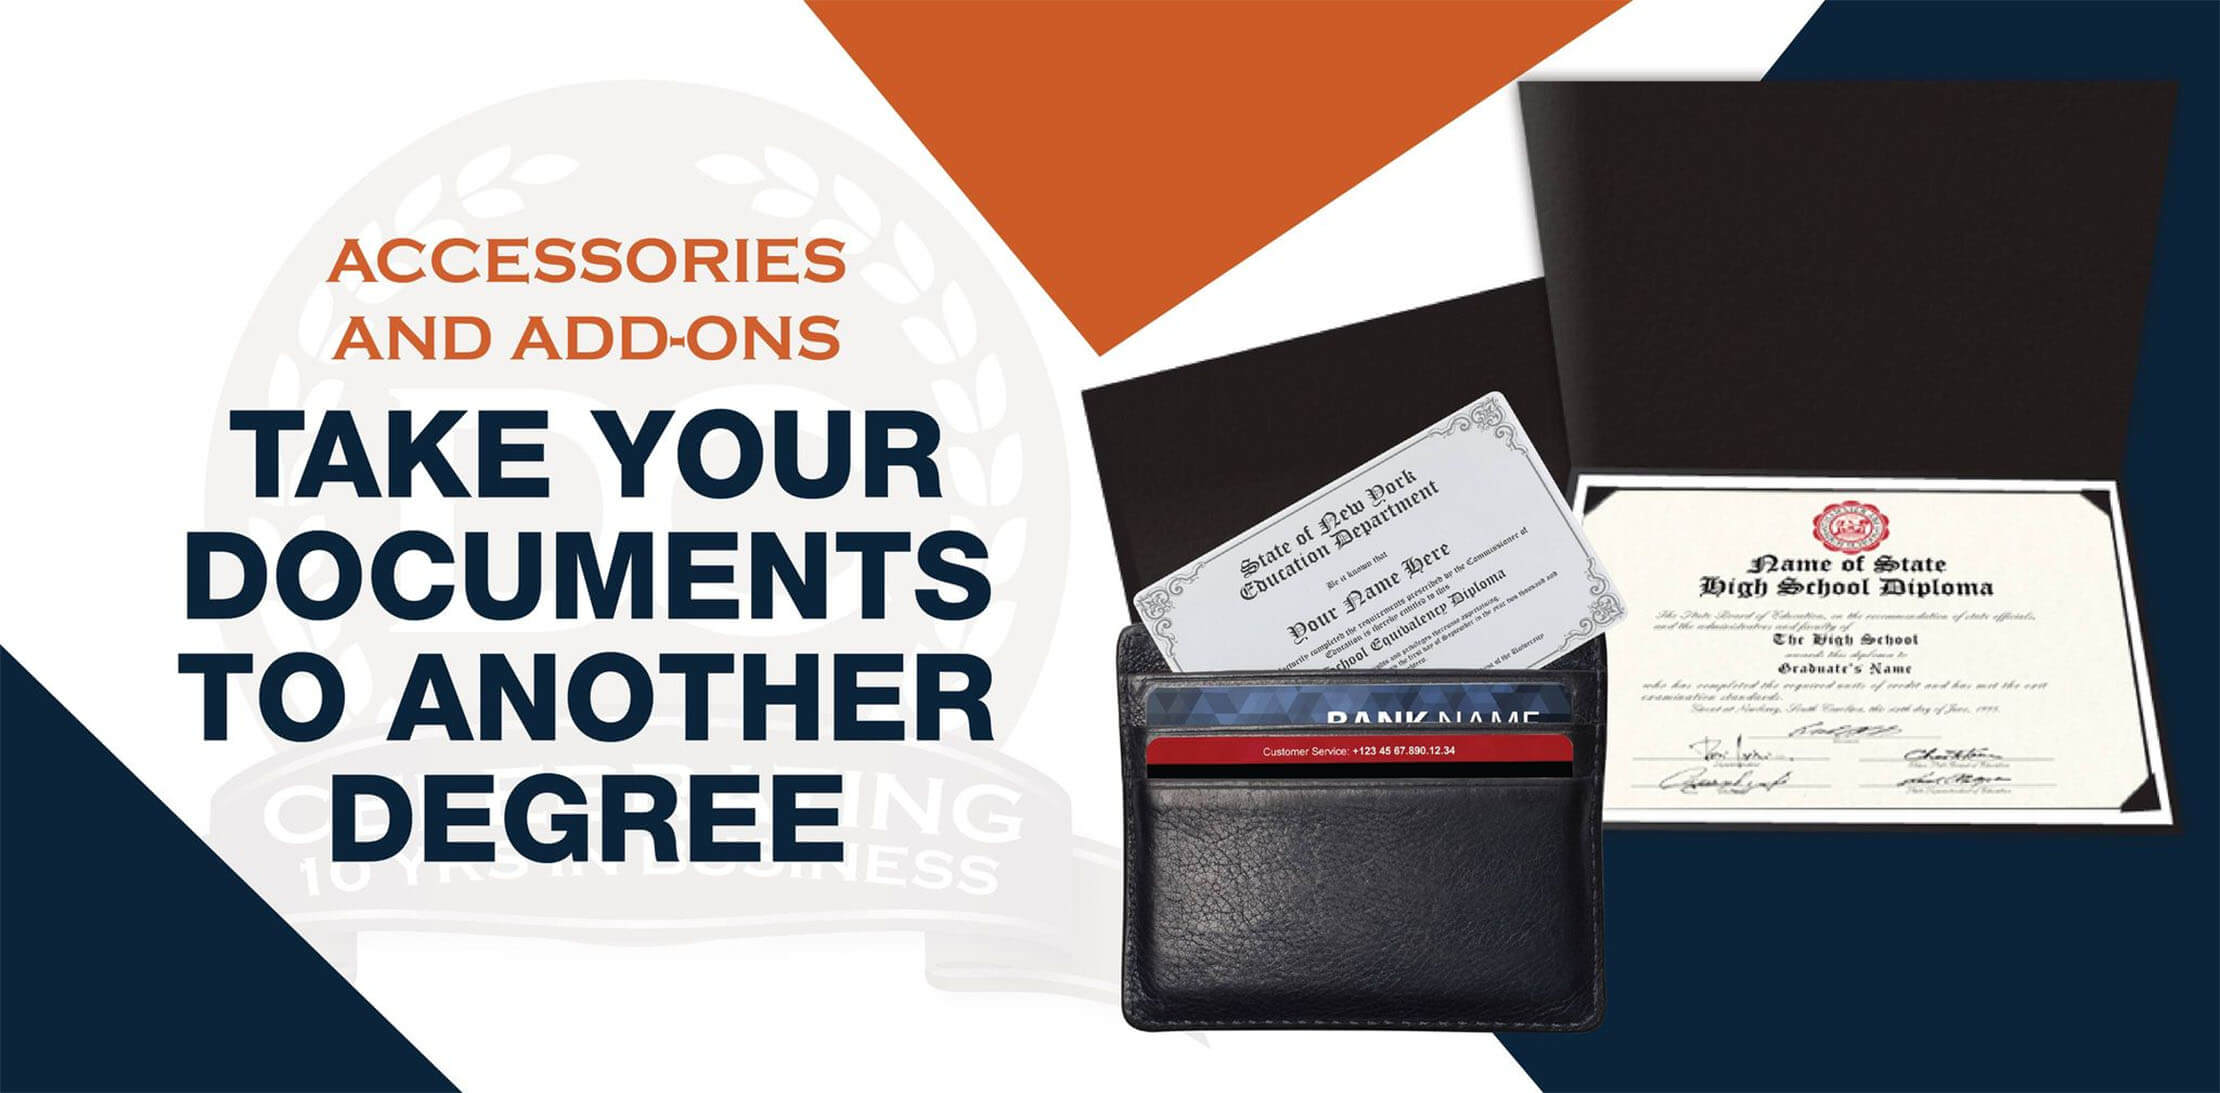 Find accessories to upgrade your Diploma Company print shop order! See what extras buyers get today. Enjoy fast shipping and guaranteed satisfaction!